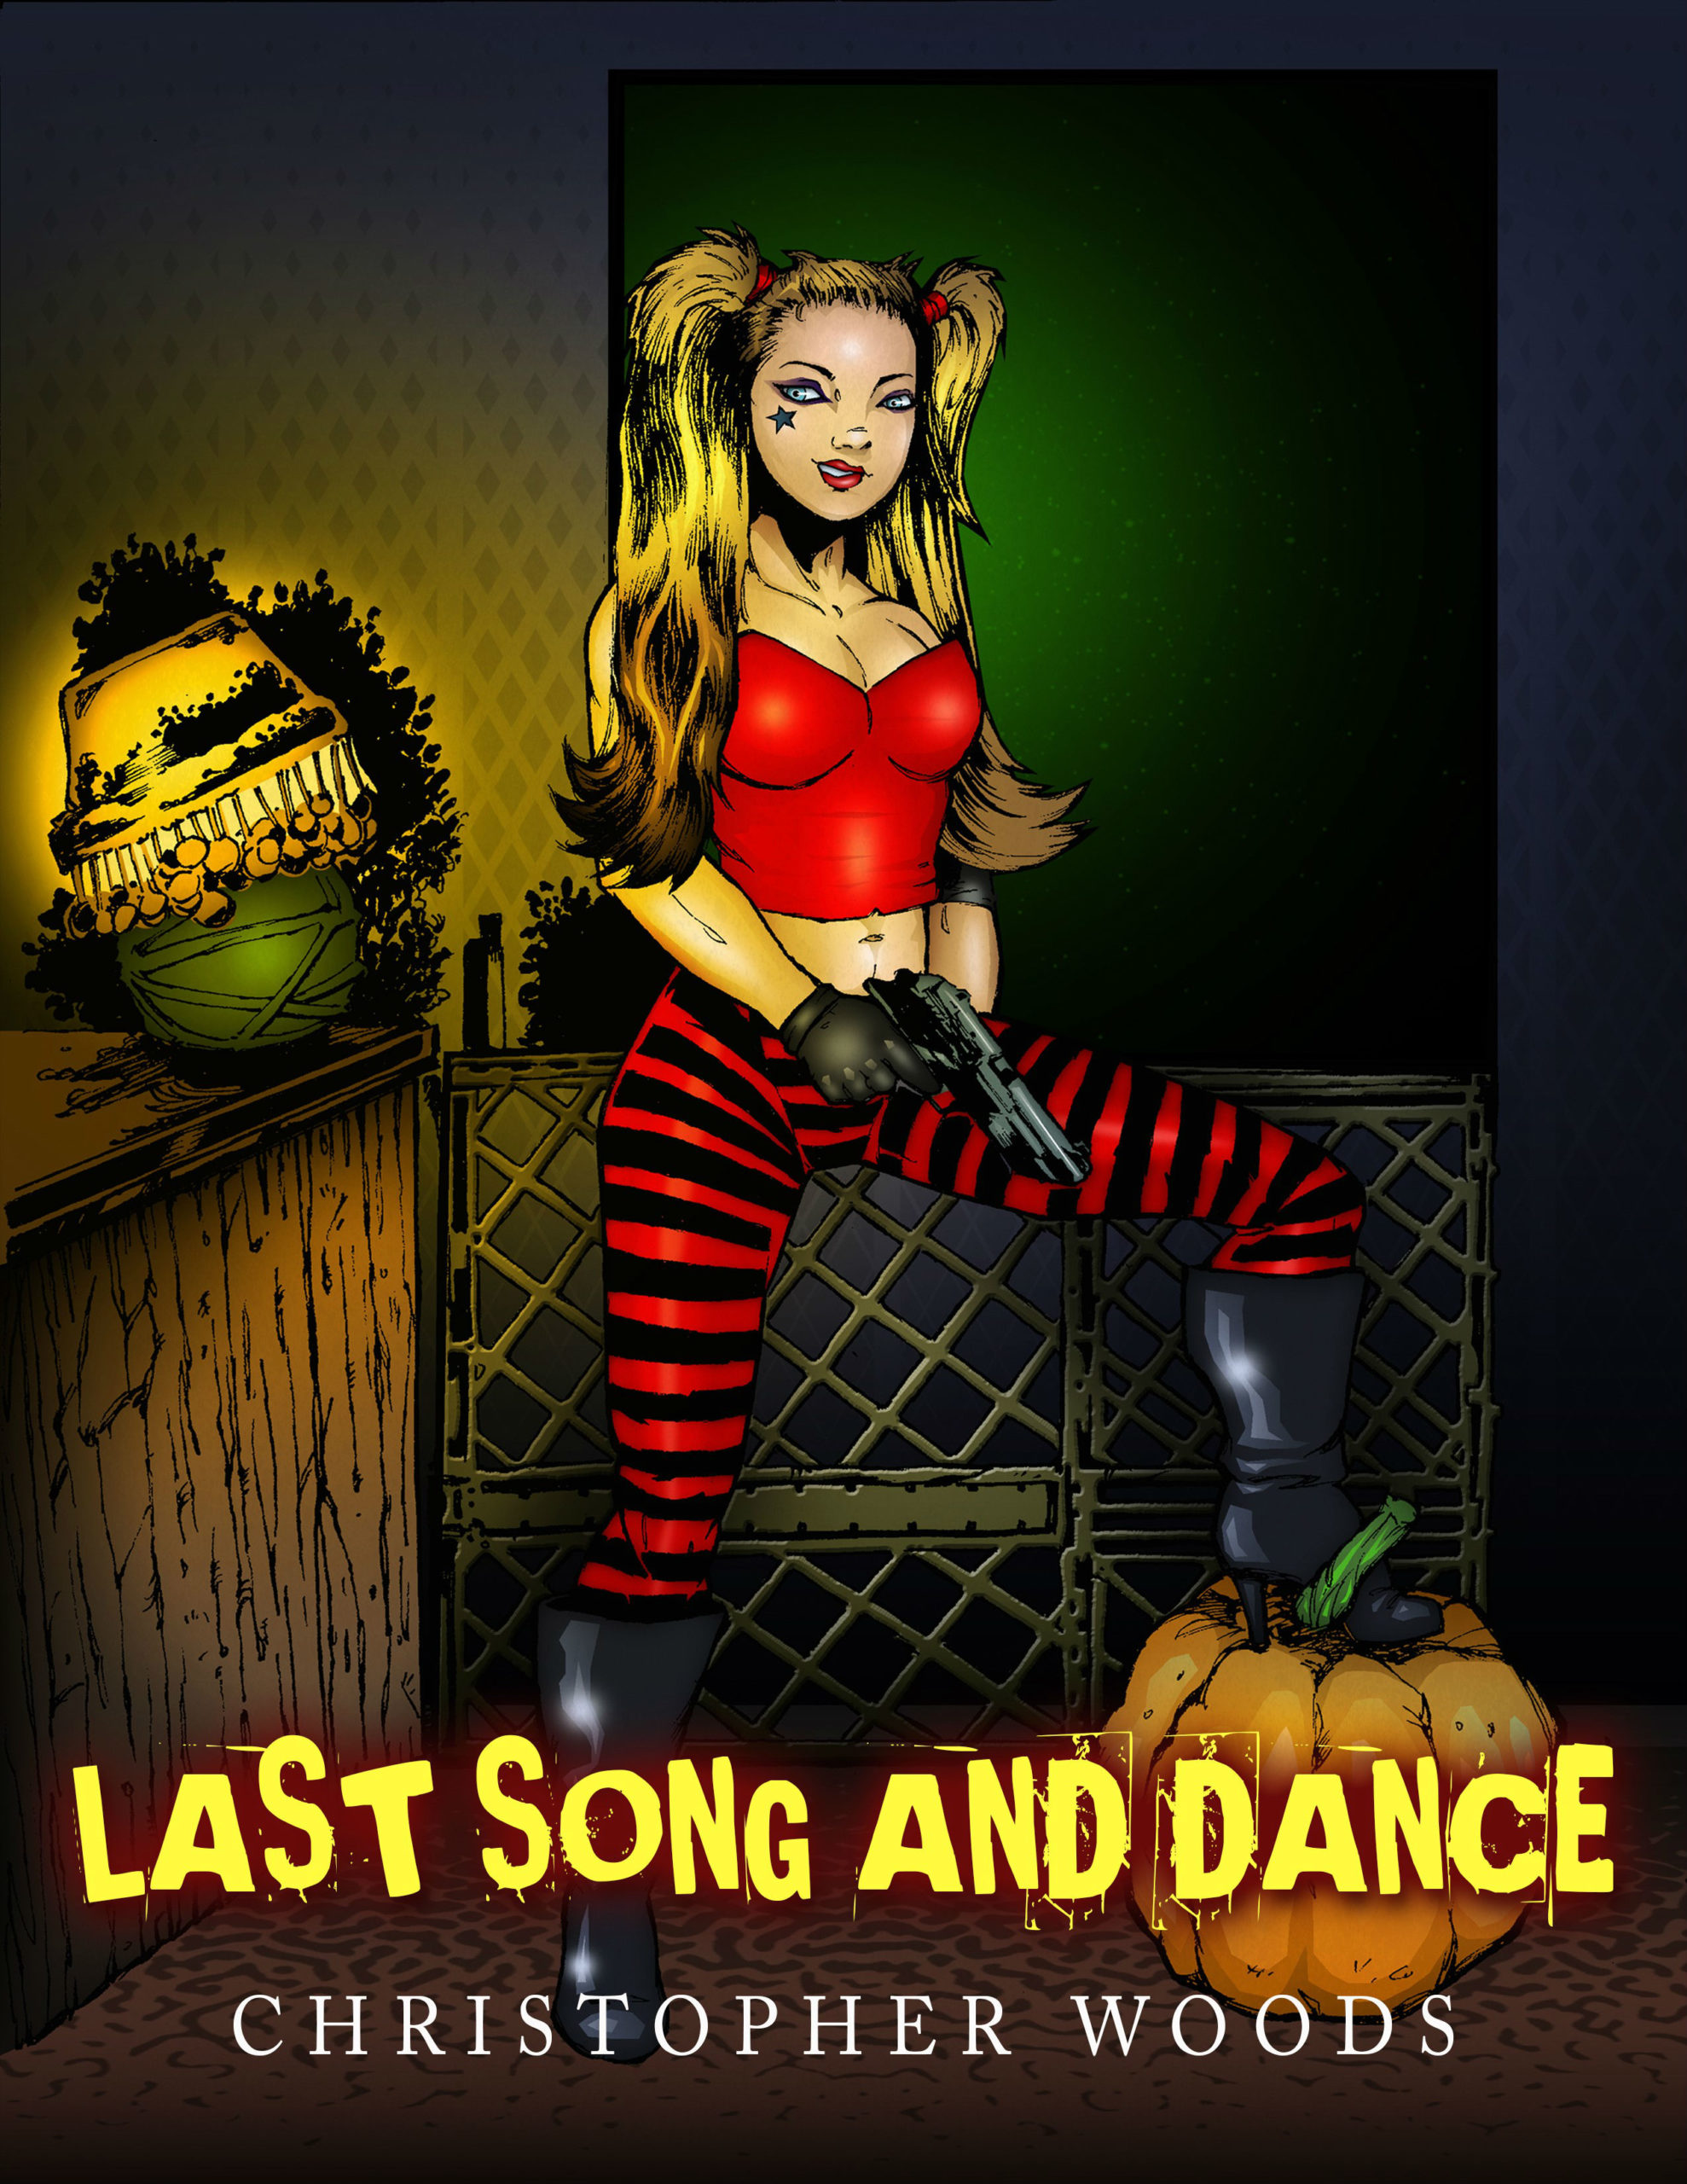 Last Song and Dance by Christopher Woods